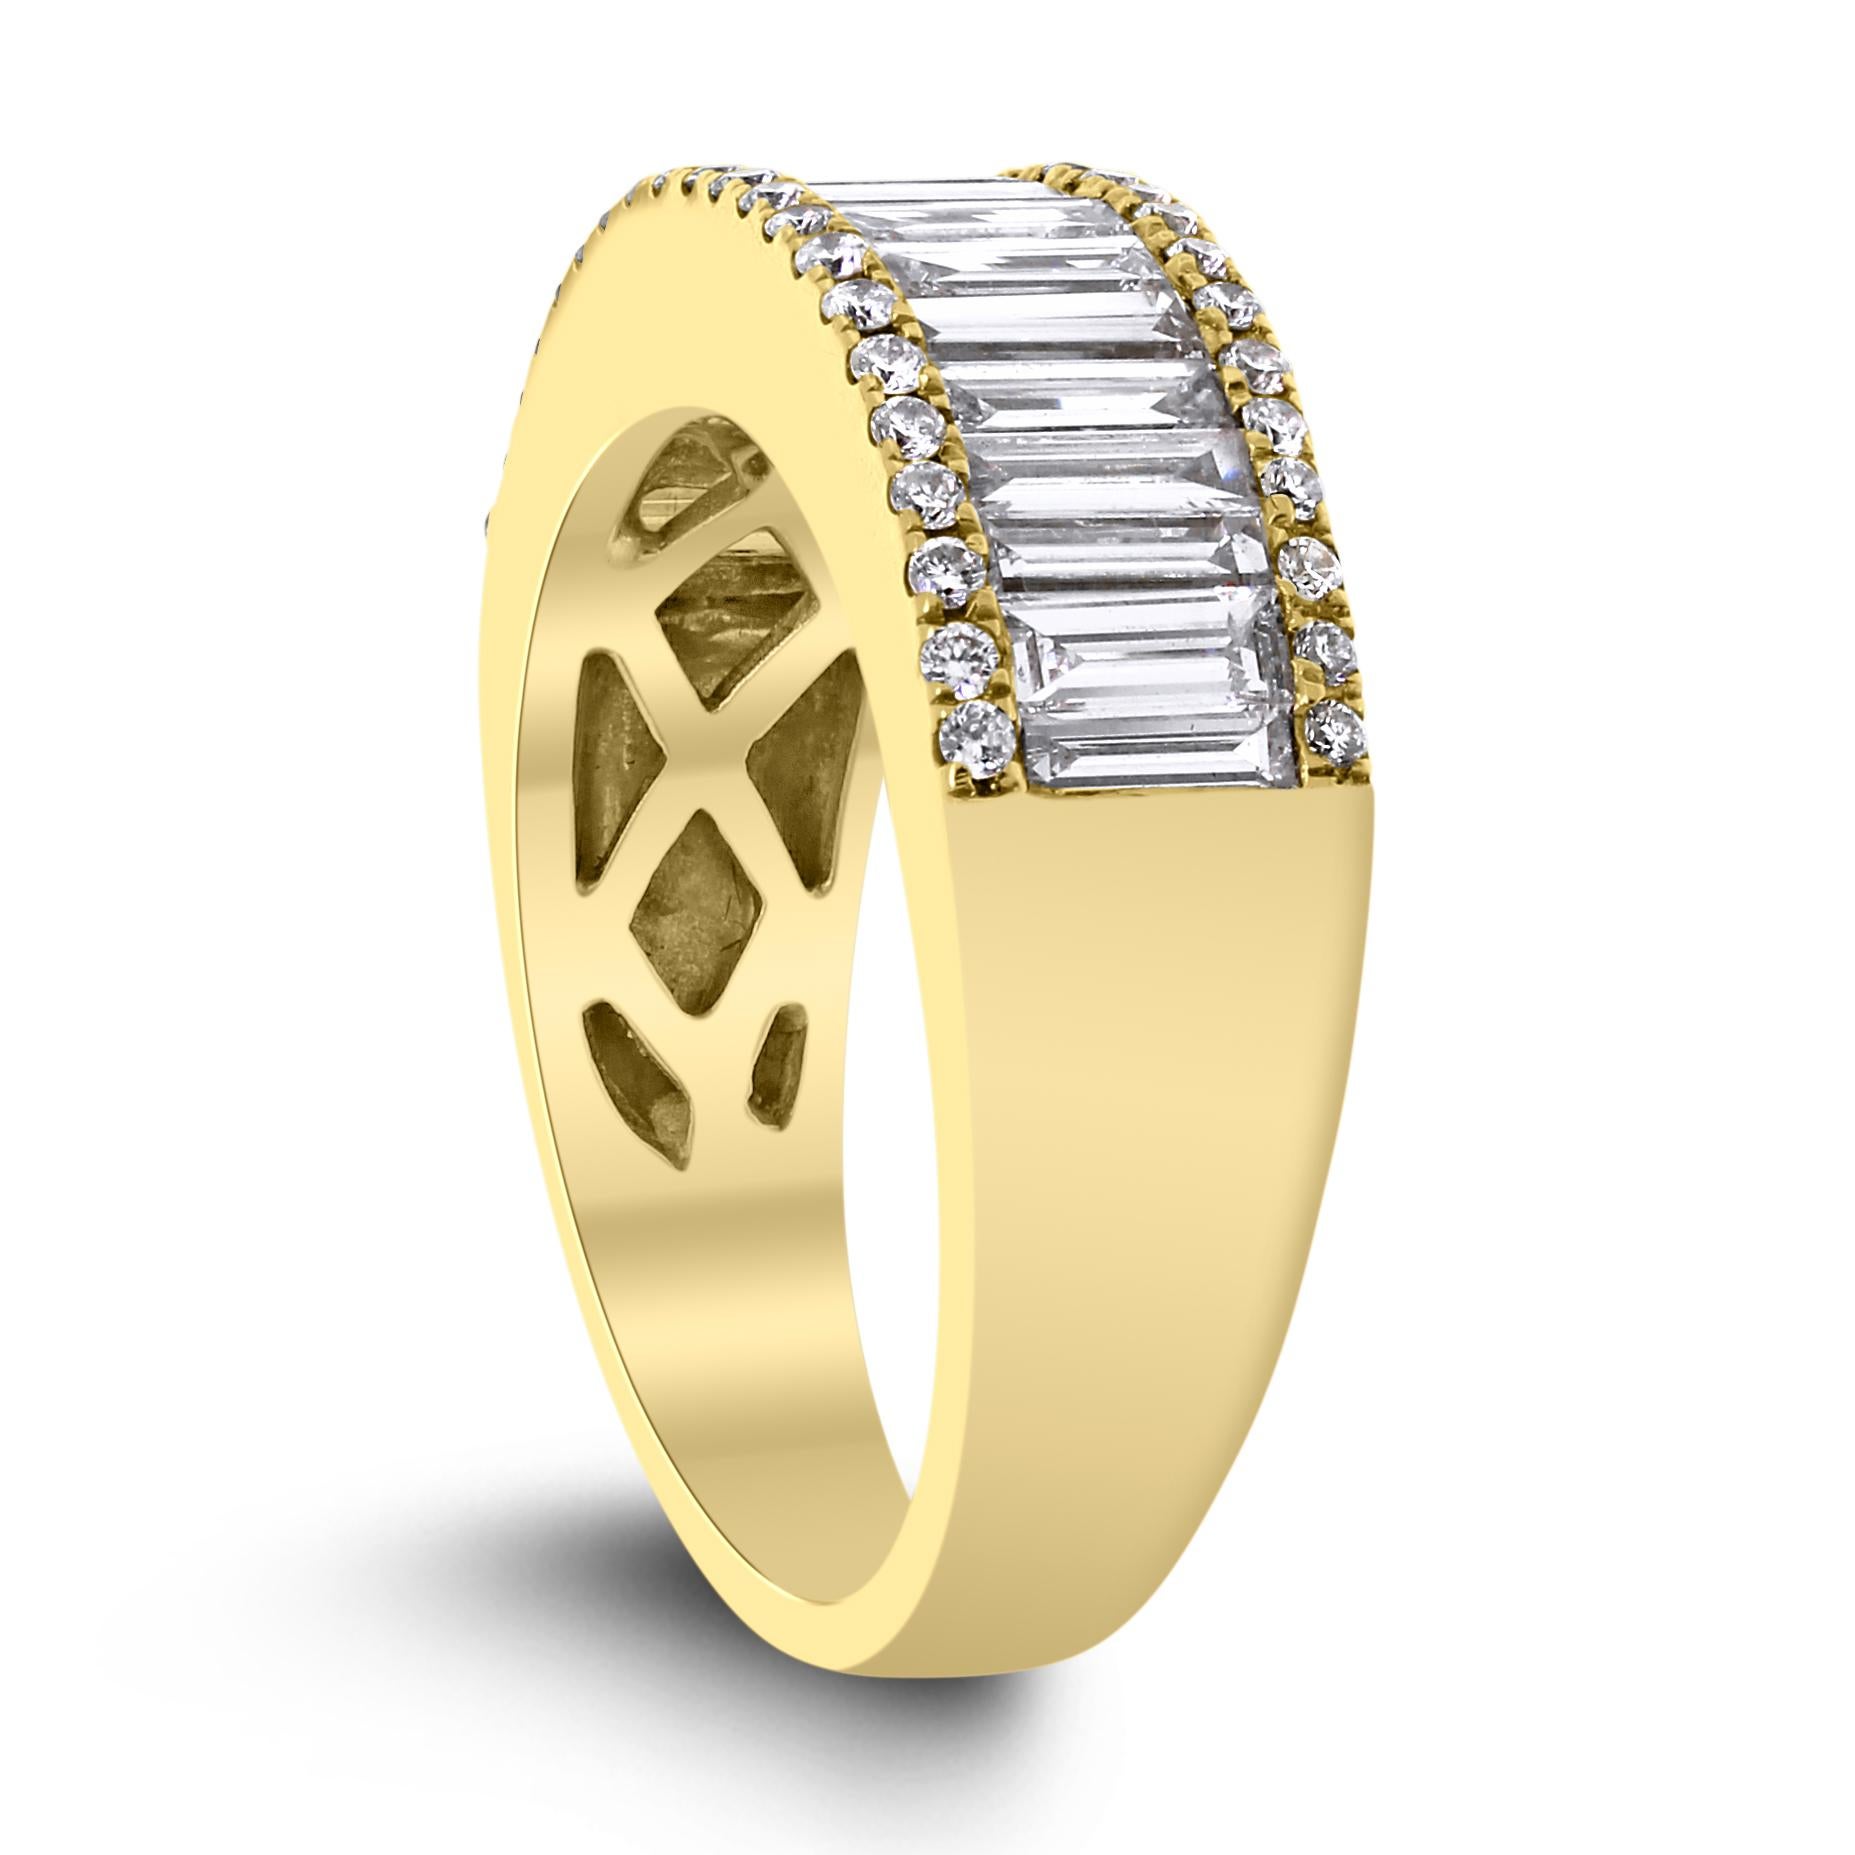 A classically styled ring in yellow gold, the baguette cut diamond band is understated and elegant.

Total Diamond Weight: 1.75 ct 
Diamond Shape: Rounds & Baguettes
Diamond Color: H - I
Diamond Clarity: VS - SI

Metal: 18K Yellow Gold
Metal Wt: